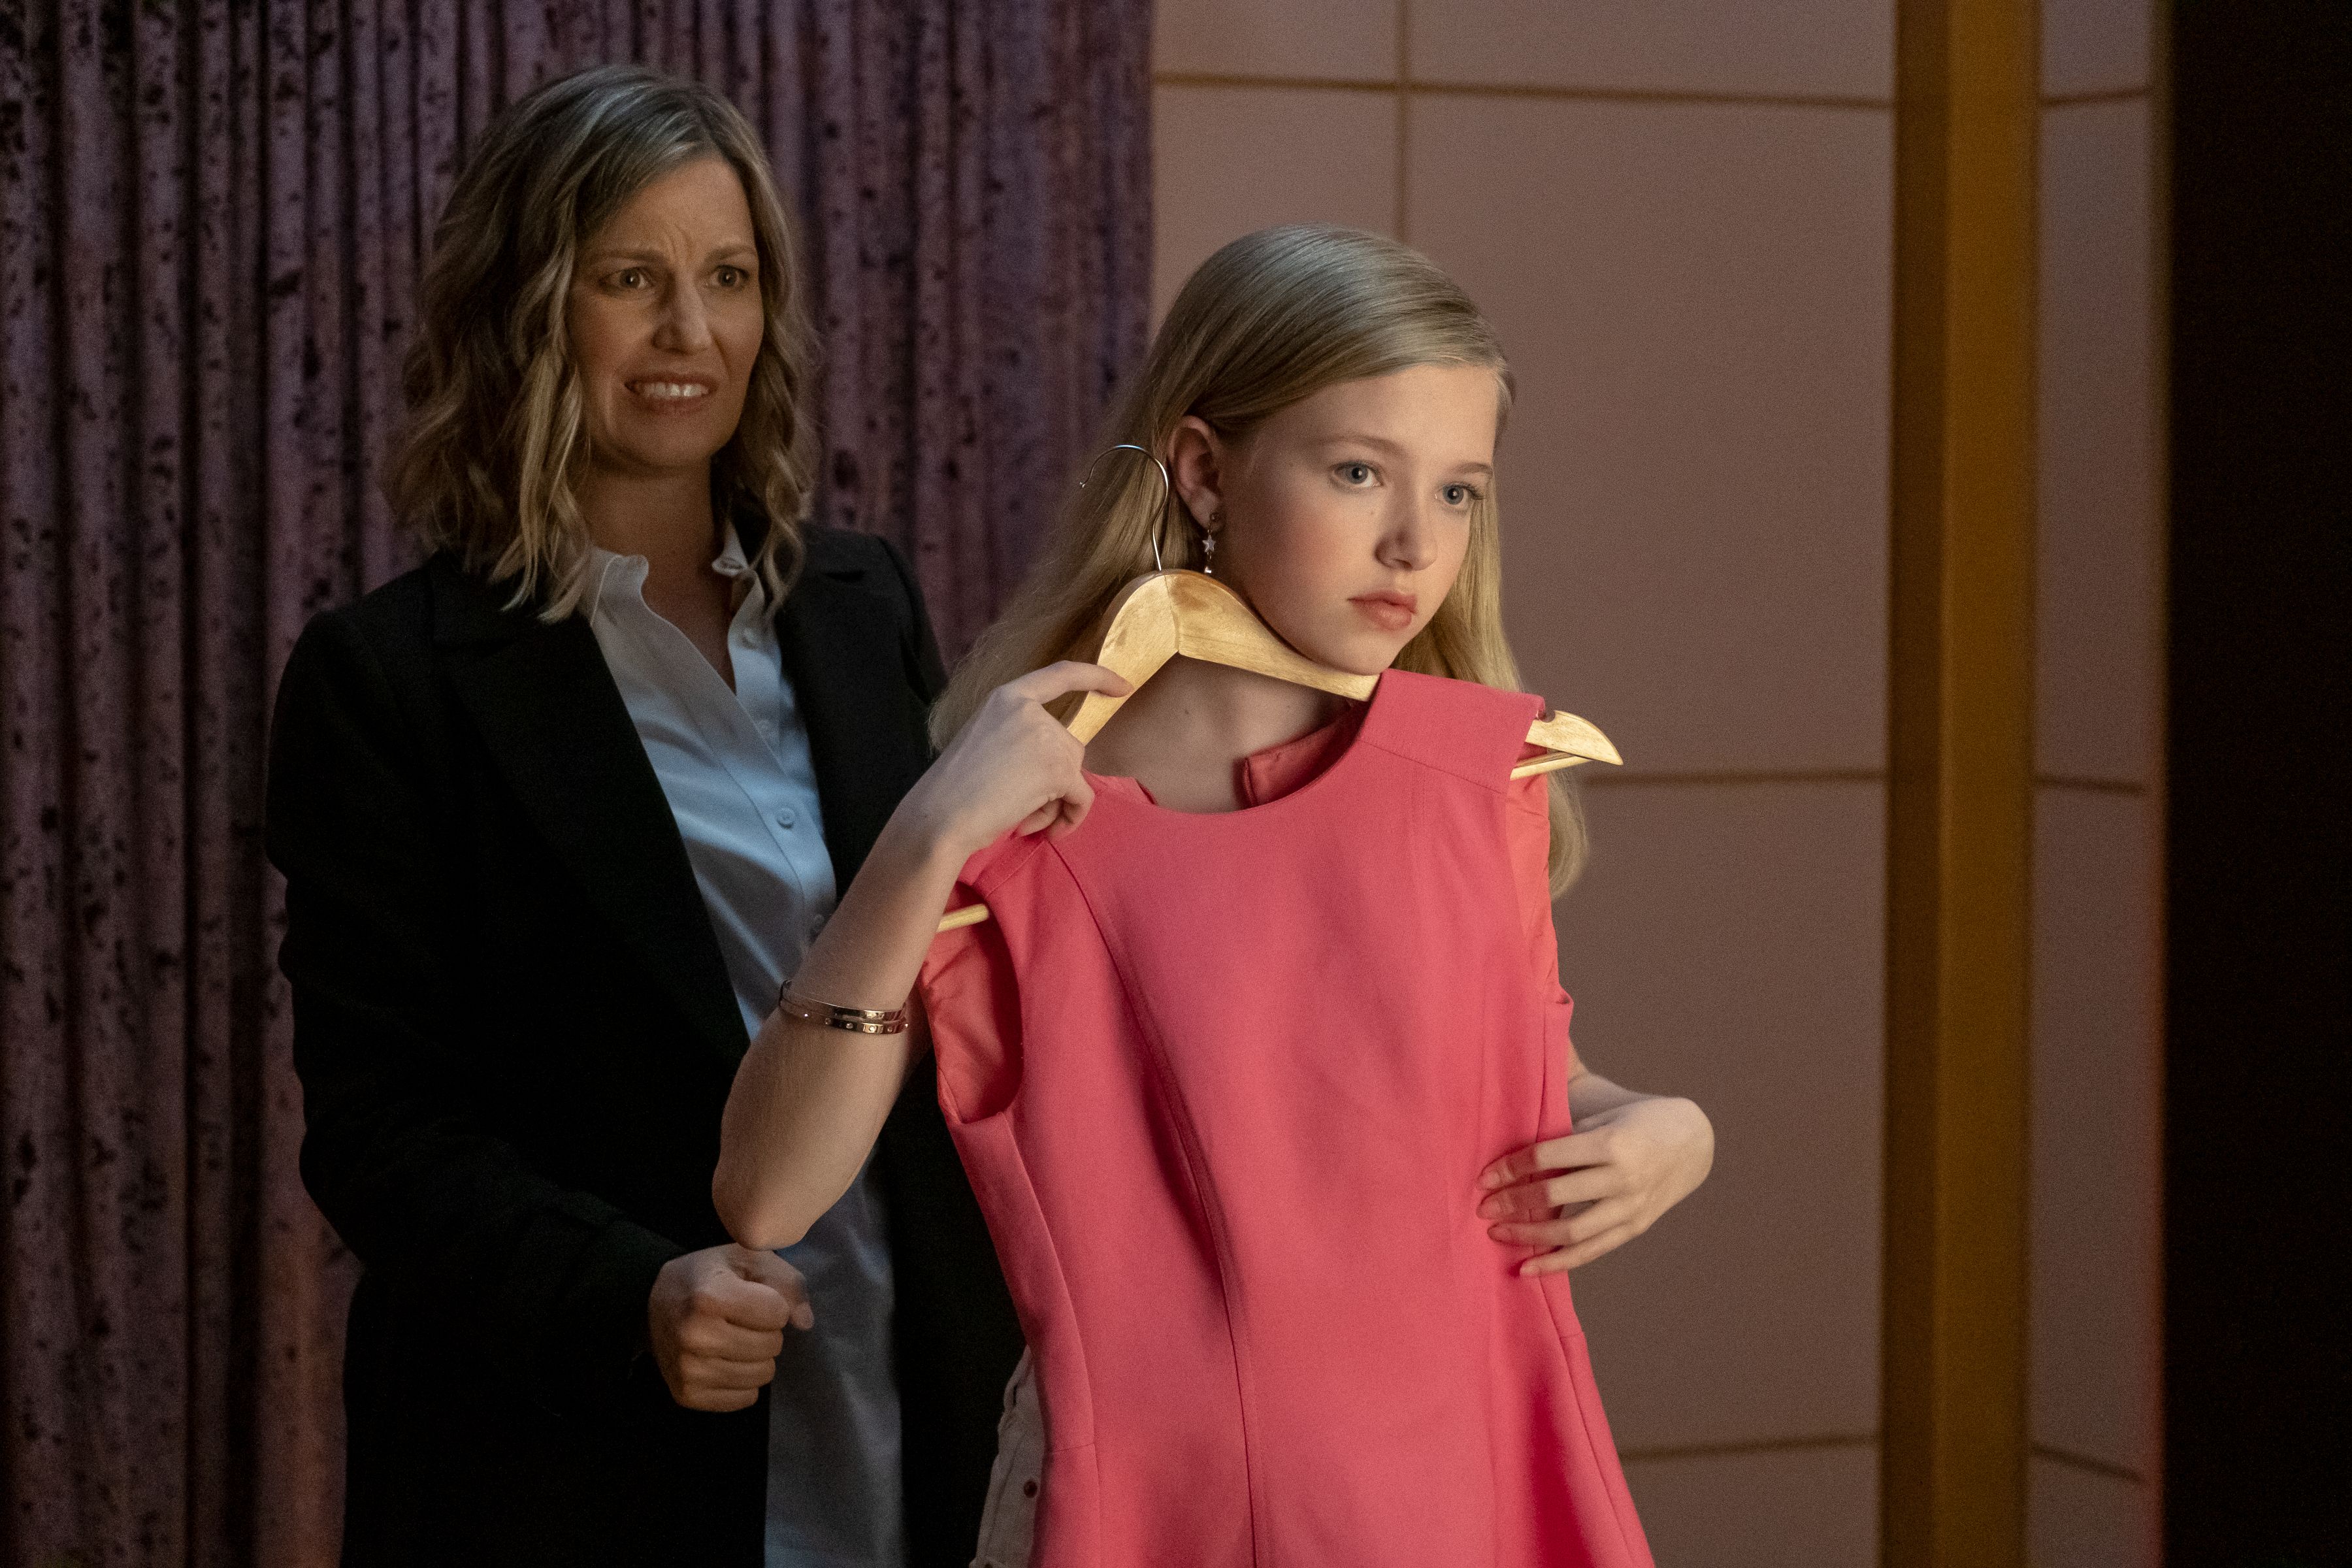 Baby-Sitters Club Episode 3 Recap The Truth About Stacey picture pic